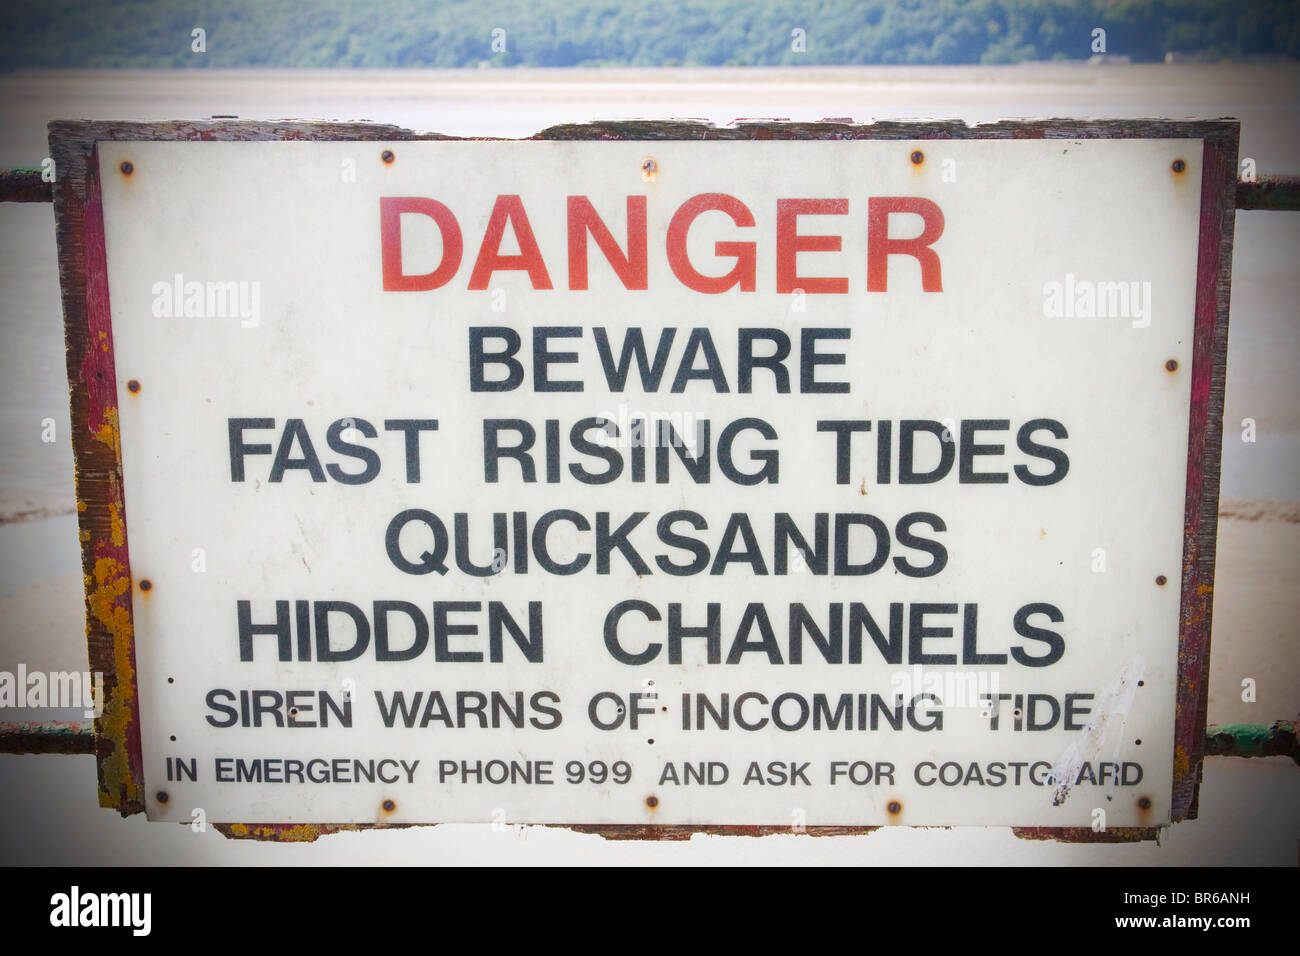 Danger sign warning of fast rising tides, quicksands and hidden channels. Stock Photo